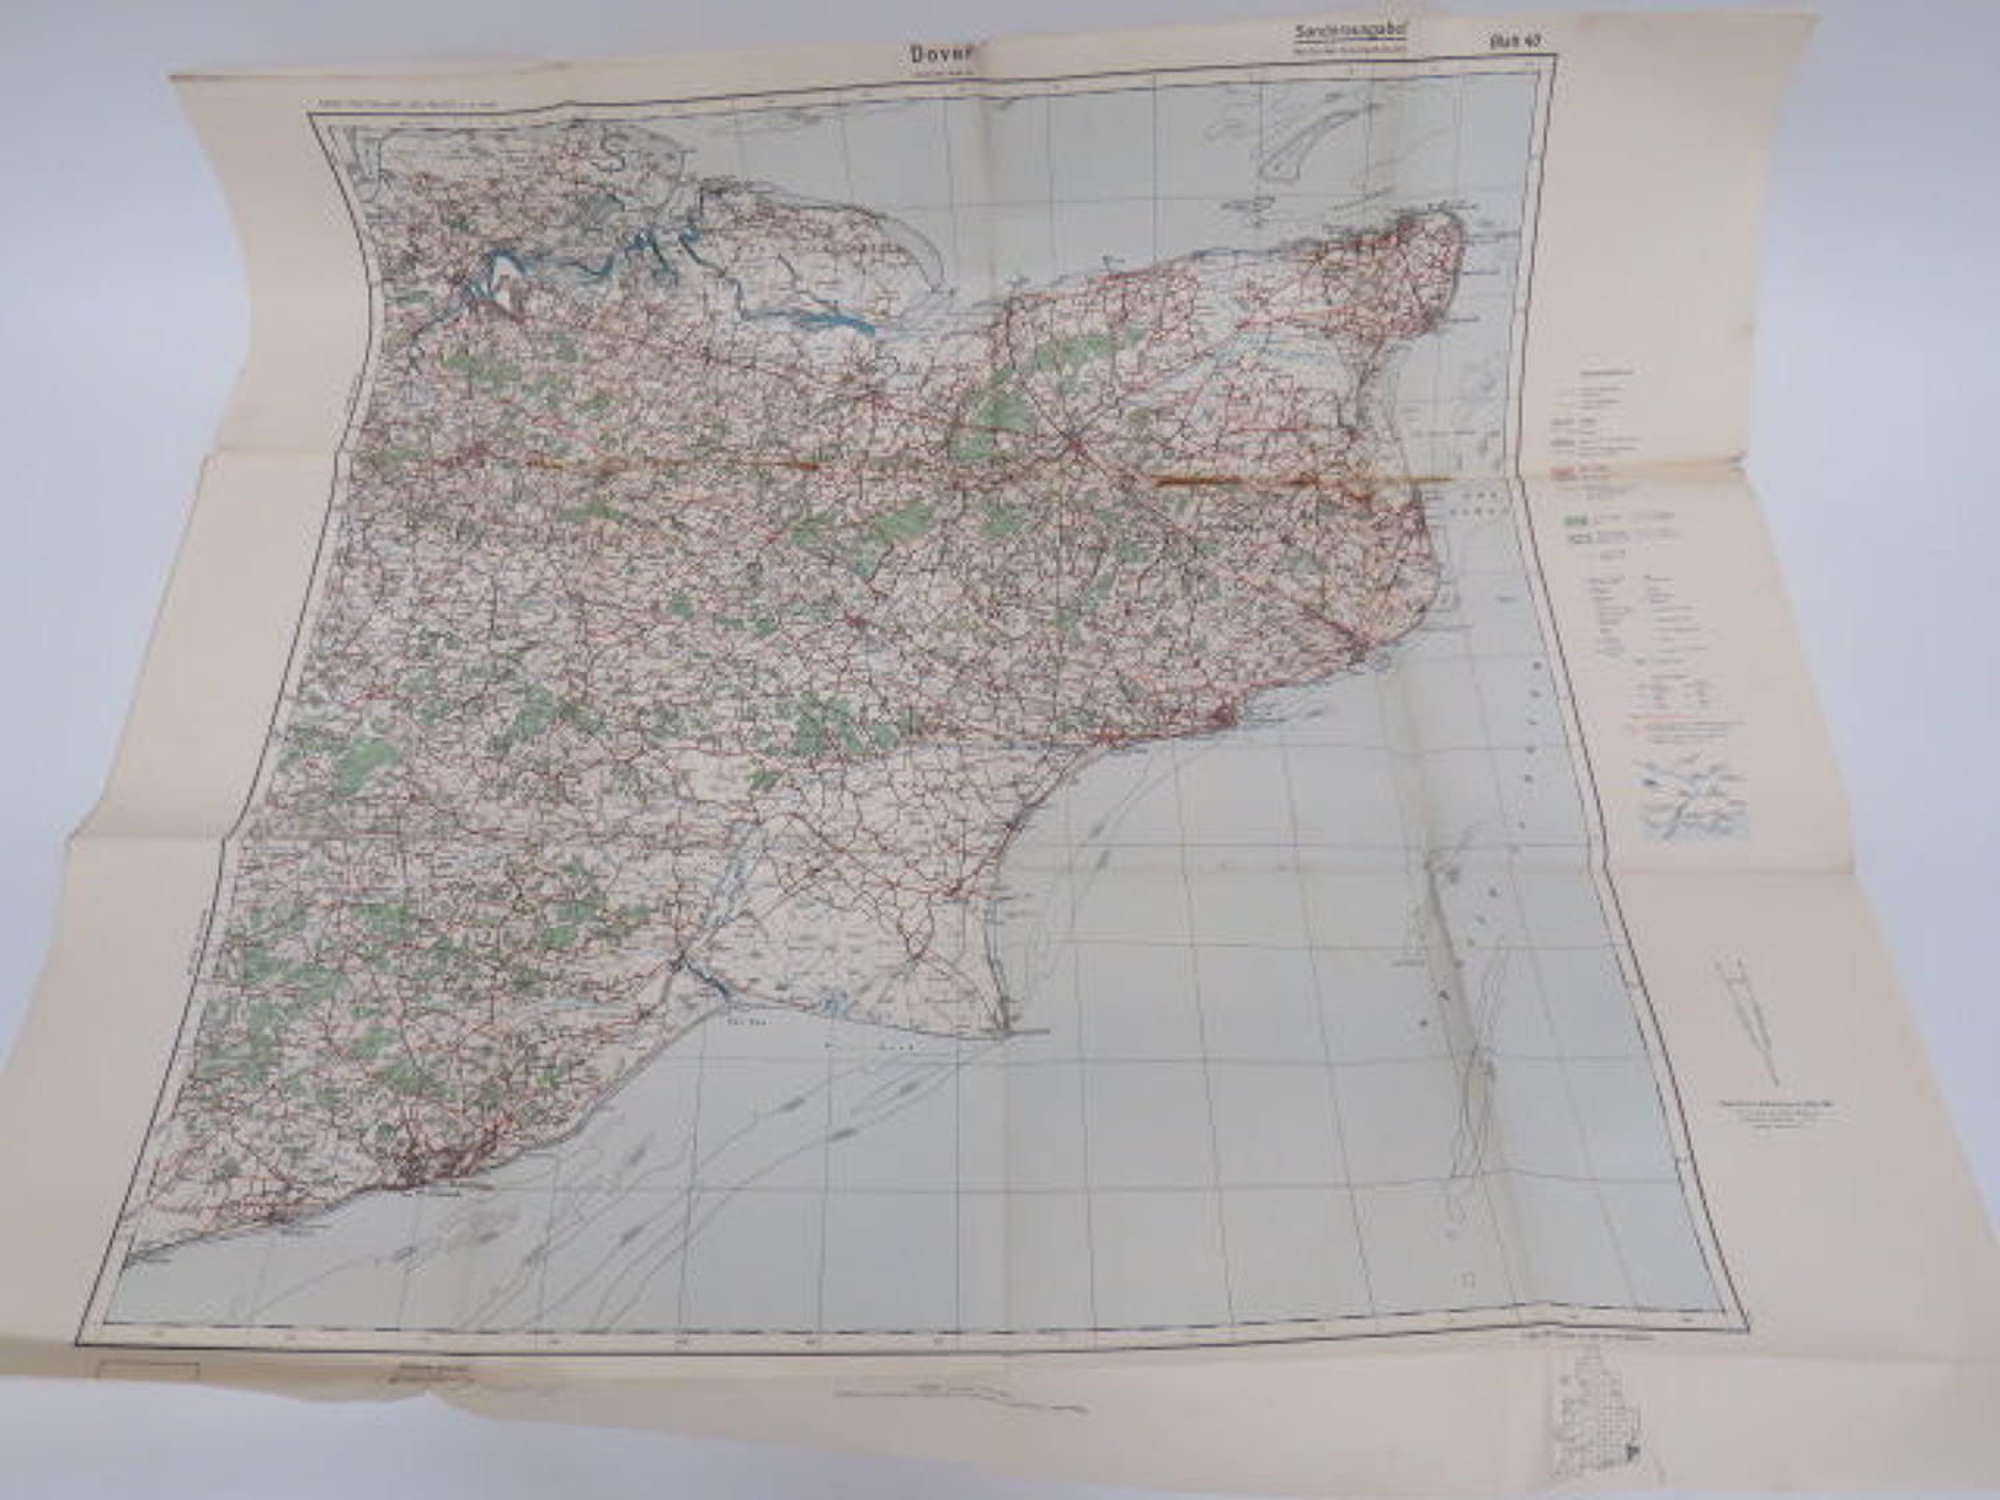 WW 2 German Invasion Map of Dover